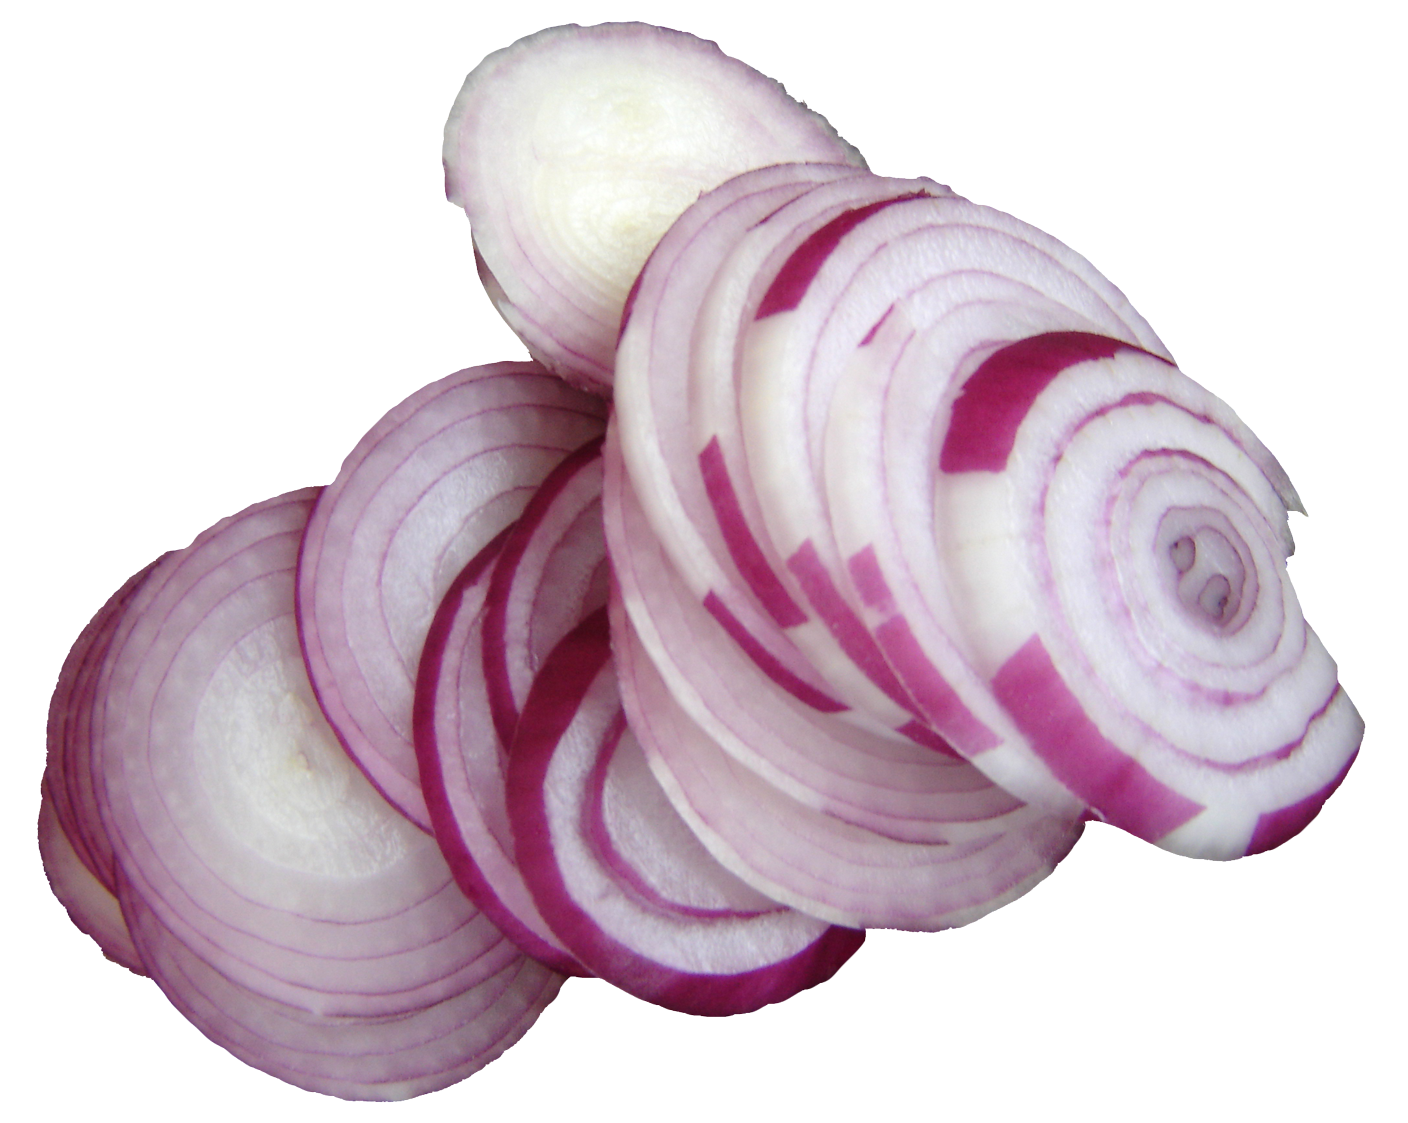 Sliced png image purepng. Pepper clipart half onion